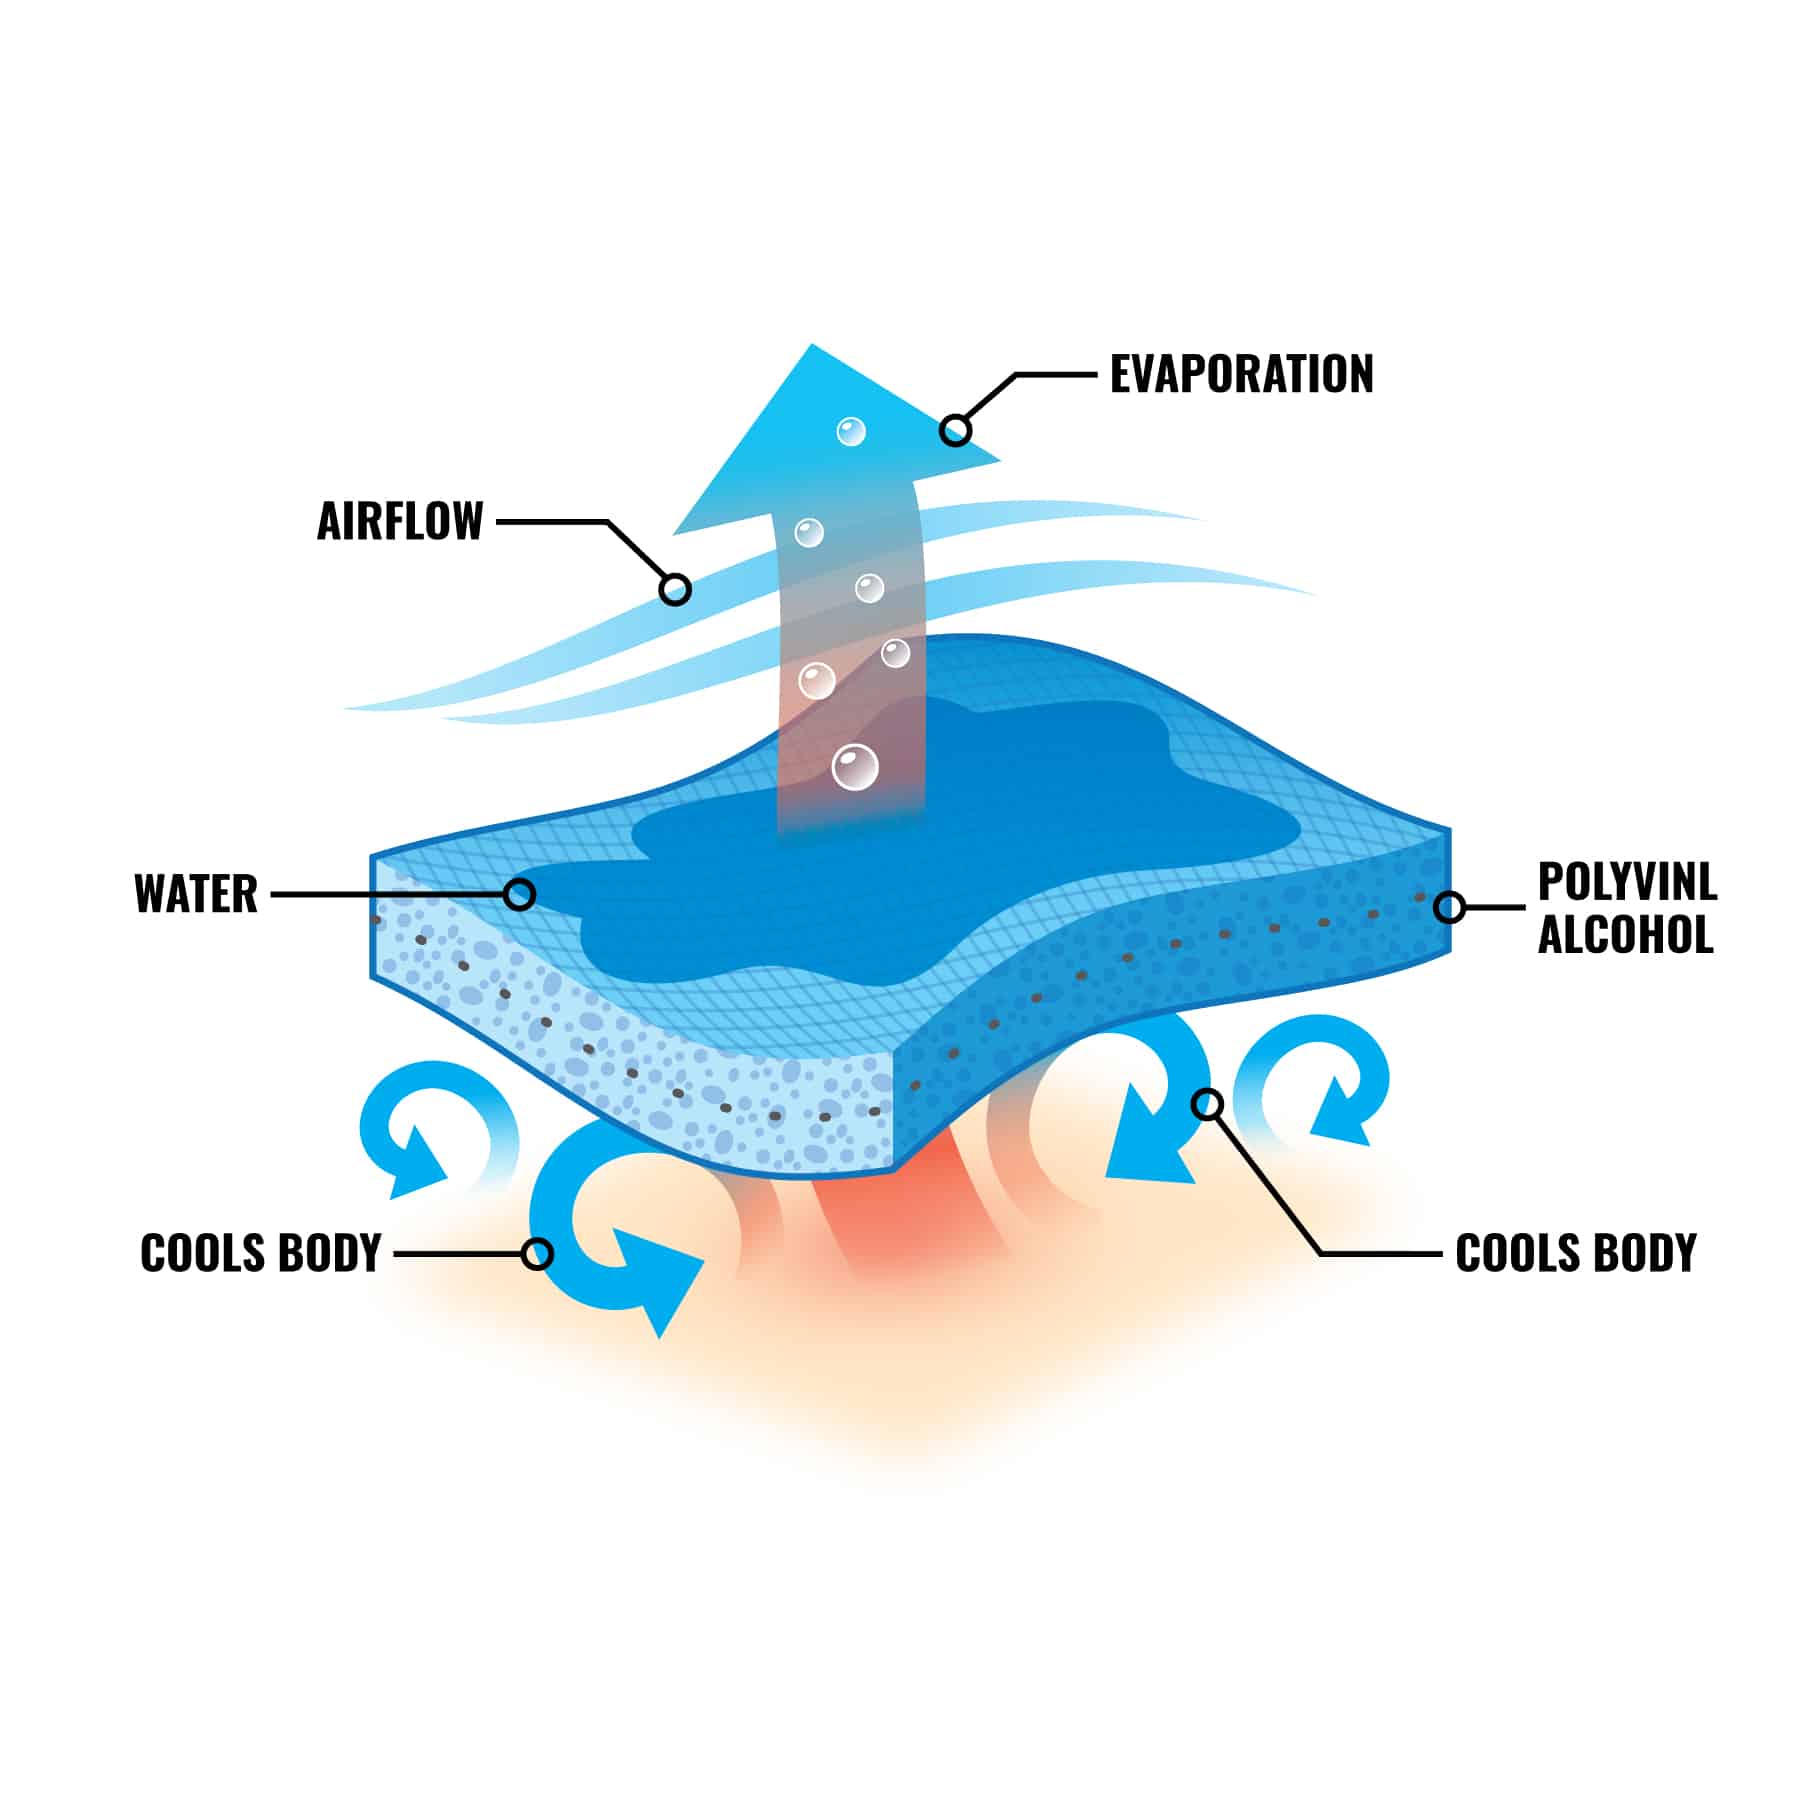 Airflow and water plus evaporation create cooling affect on body via polyvinyl alcohol material